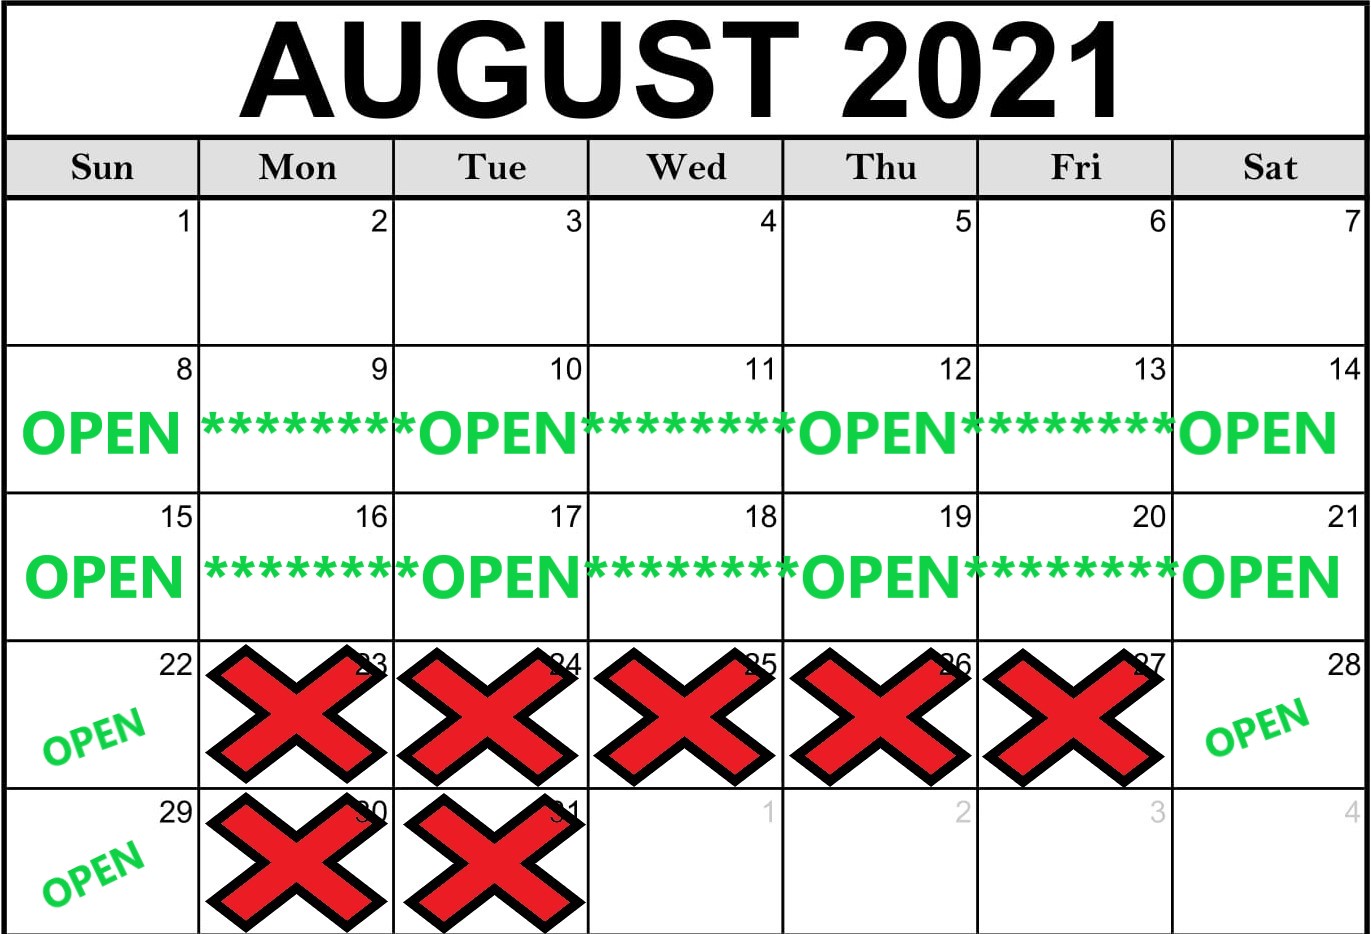 Please check out the calendars below to see the remaining days open for